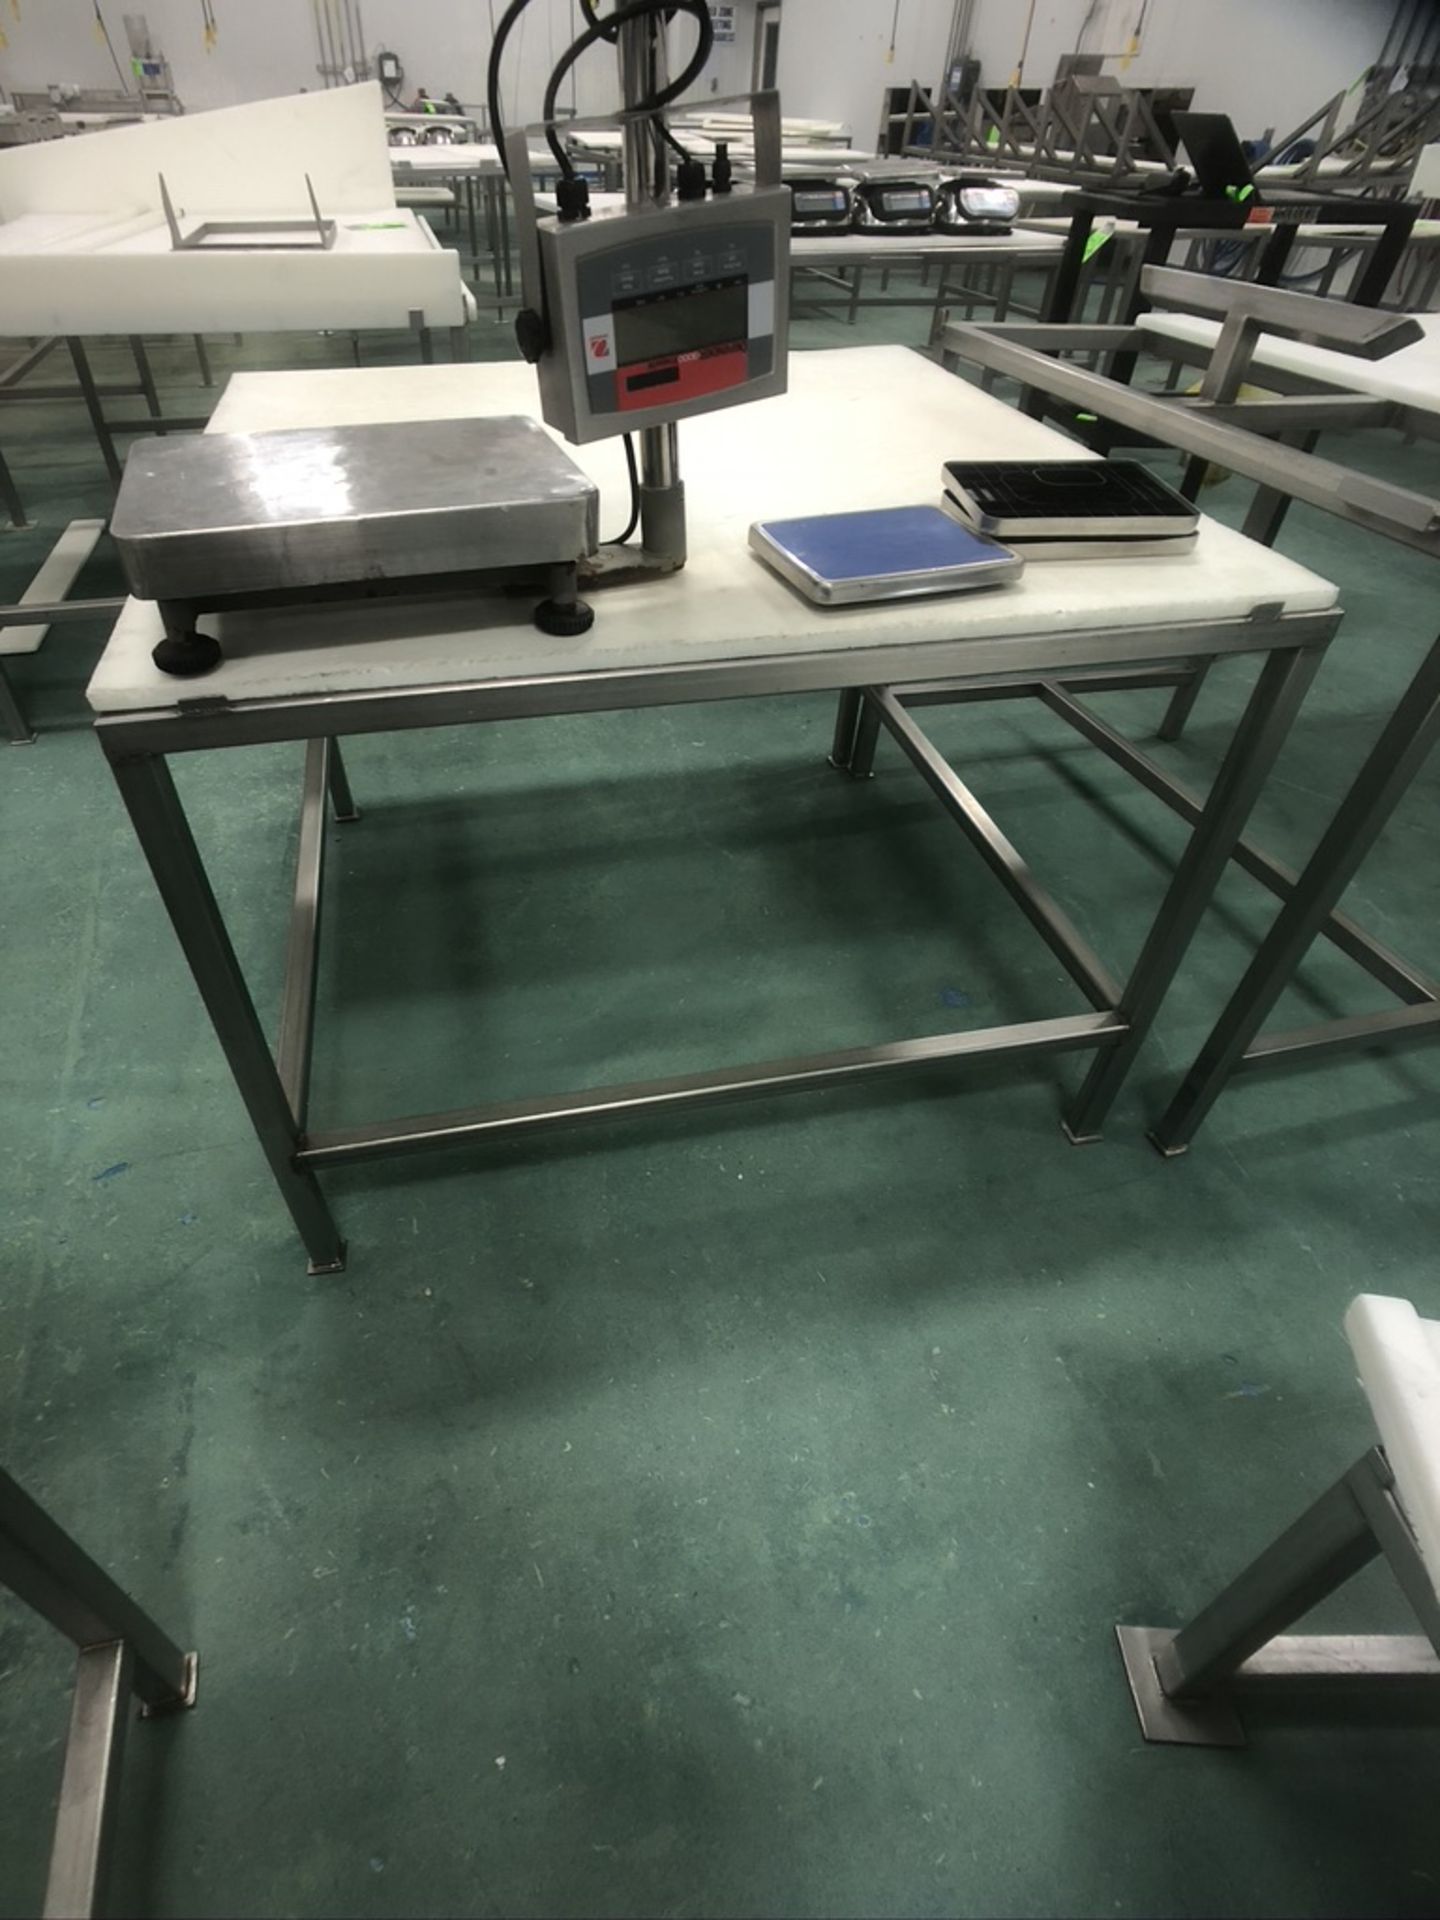 S/S TABLE WITH UMHW CUTTING BOARD TOP, APPX DIM. LWH'' 48 X 48 X 34 - Image 3 of 6